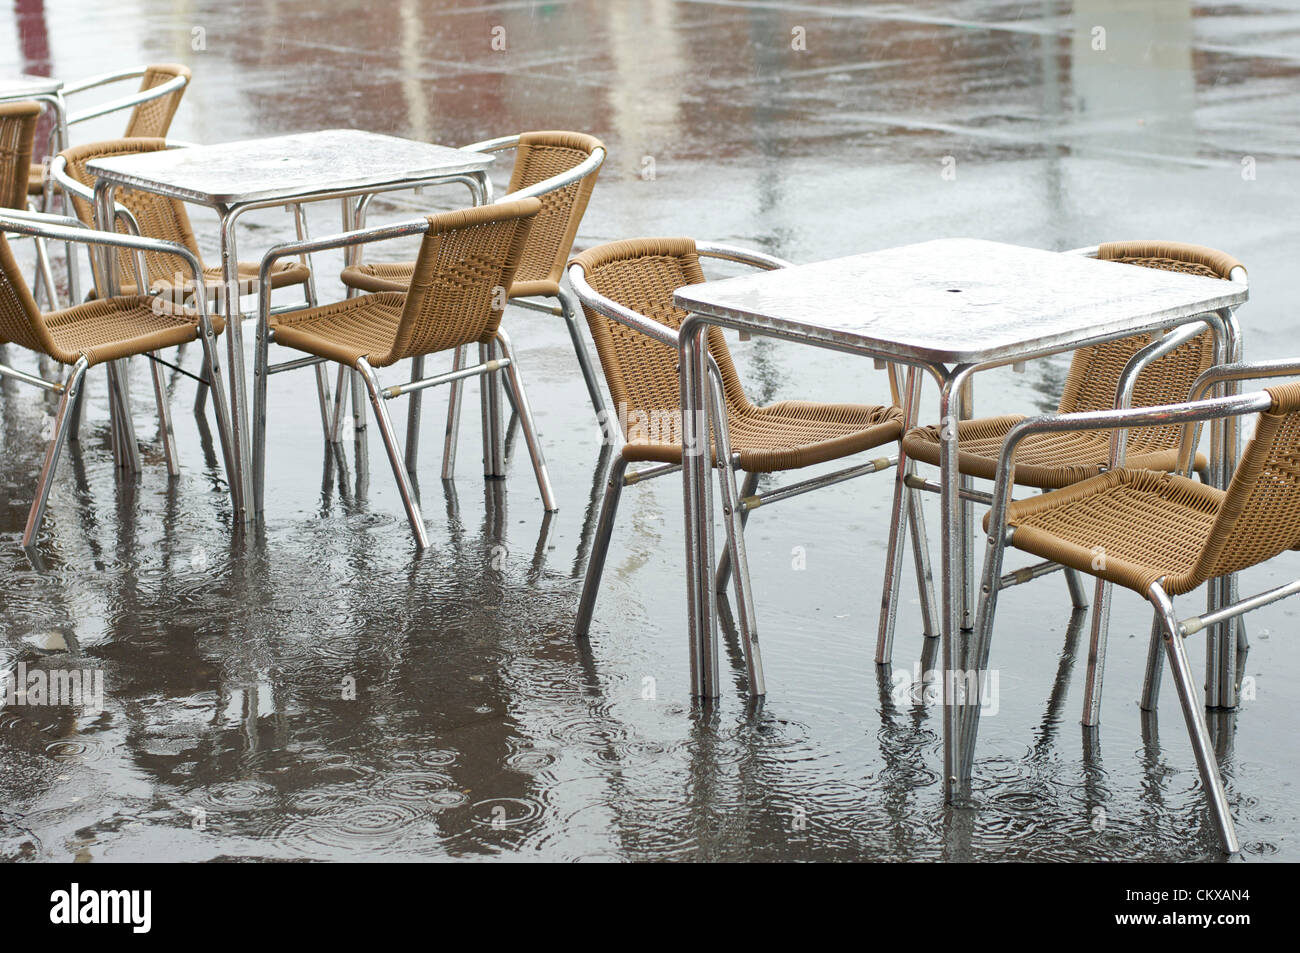 Pavement cafe tables in the rain Stock Photo - Alamy